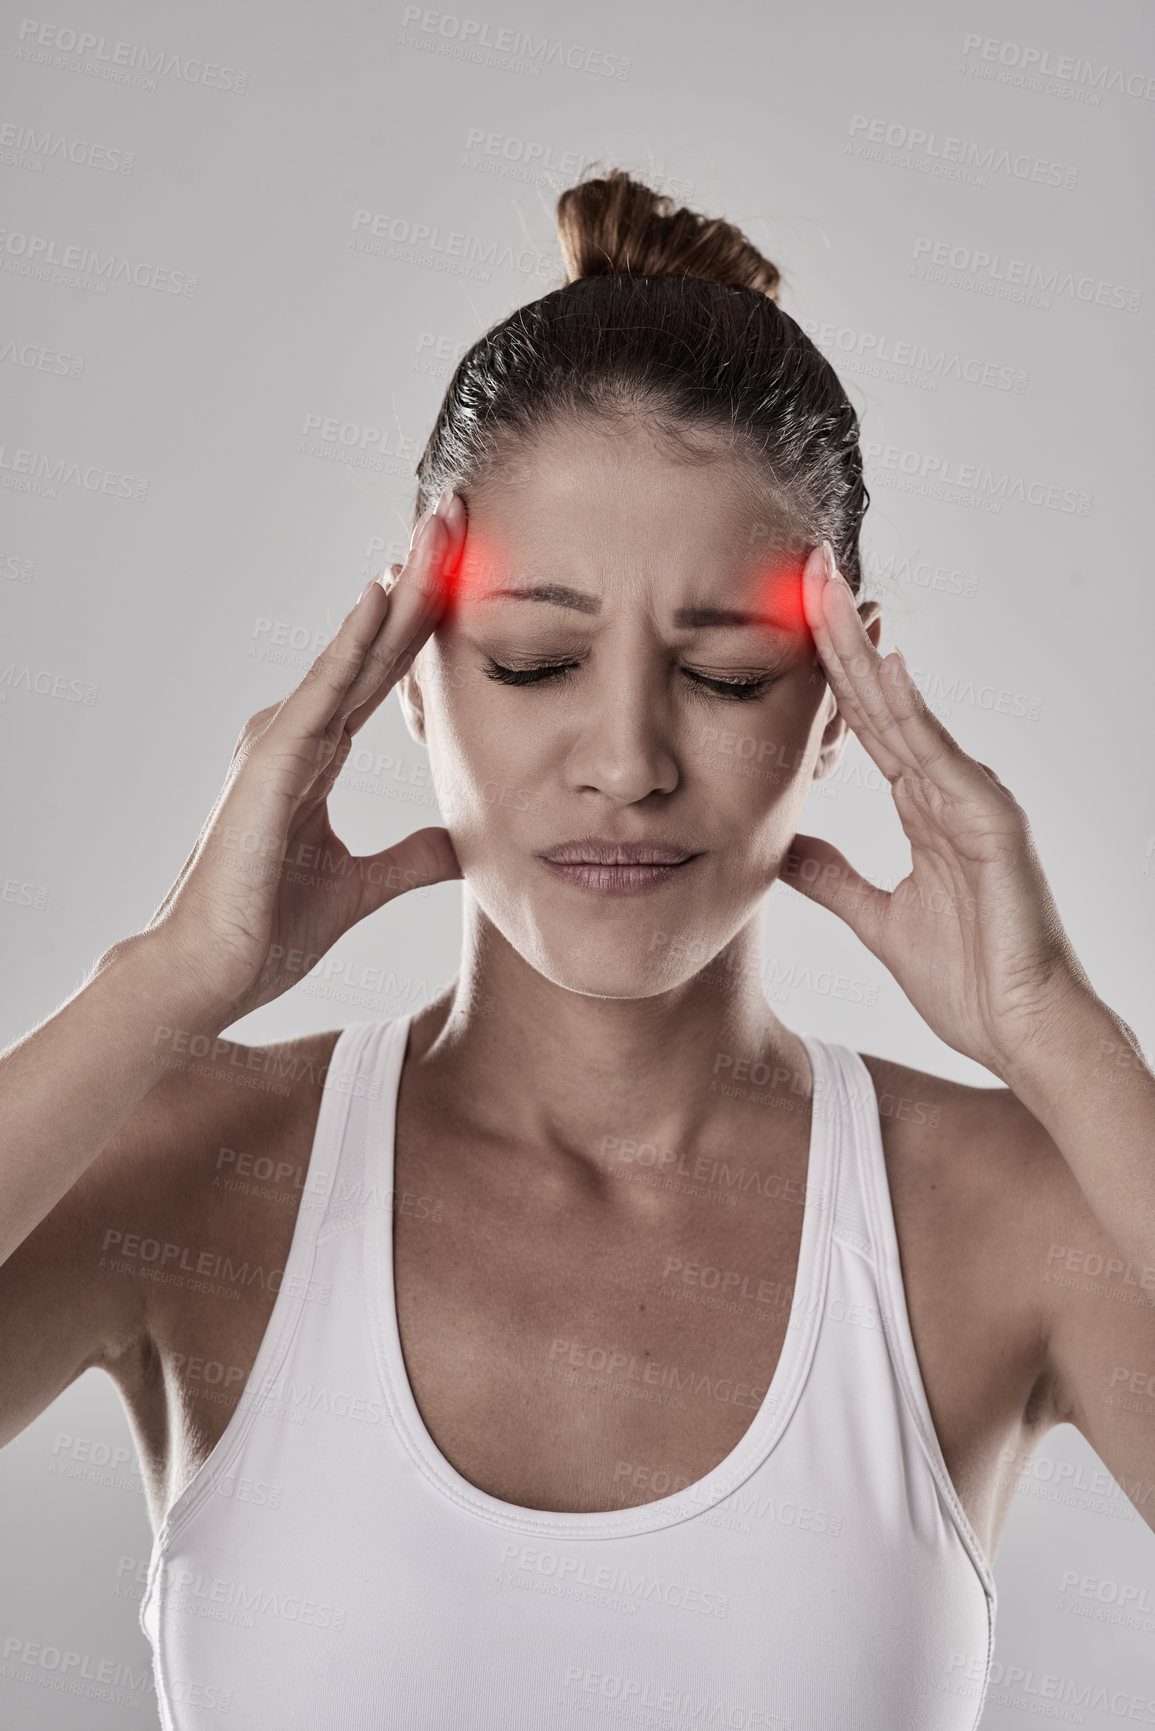 Buy stock photo Studio shot of an athletic young woman holding her head in pain against a grey background